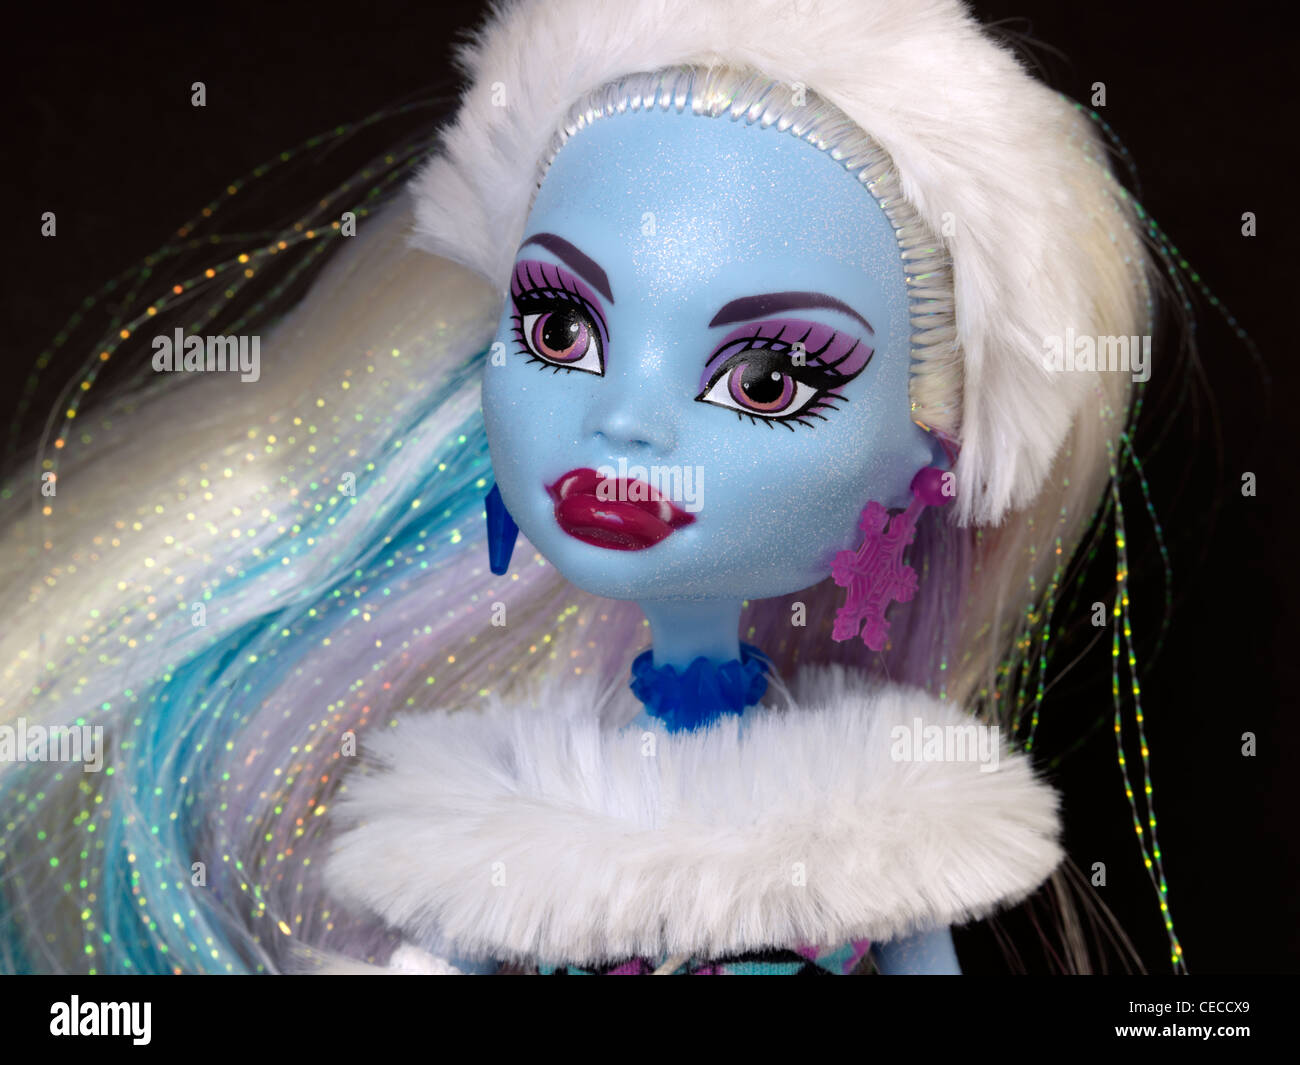 Monster high High Resolution Stock Photography and Images - Alamy